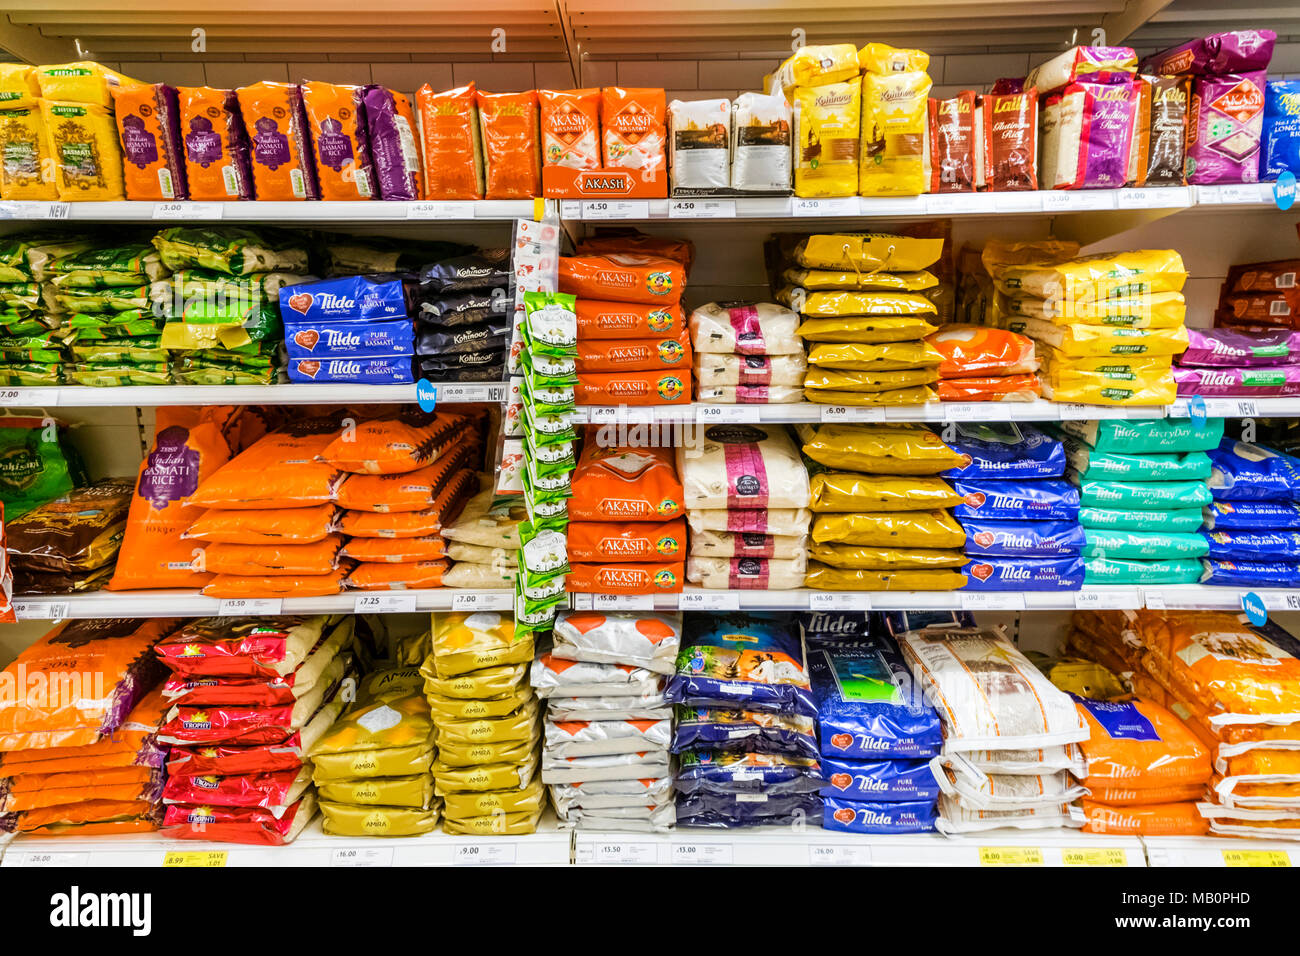 Rice Display High Resolution Stock Photography and Images - Alamy